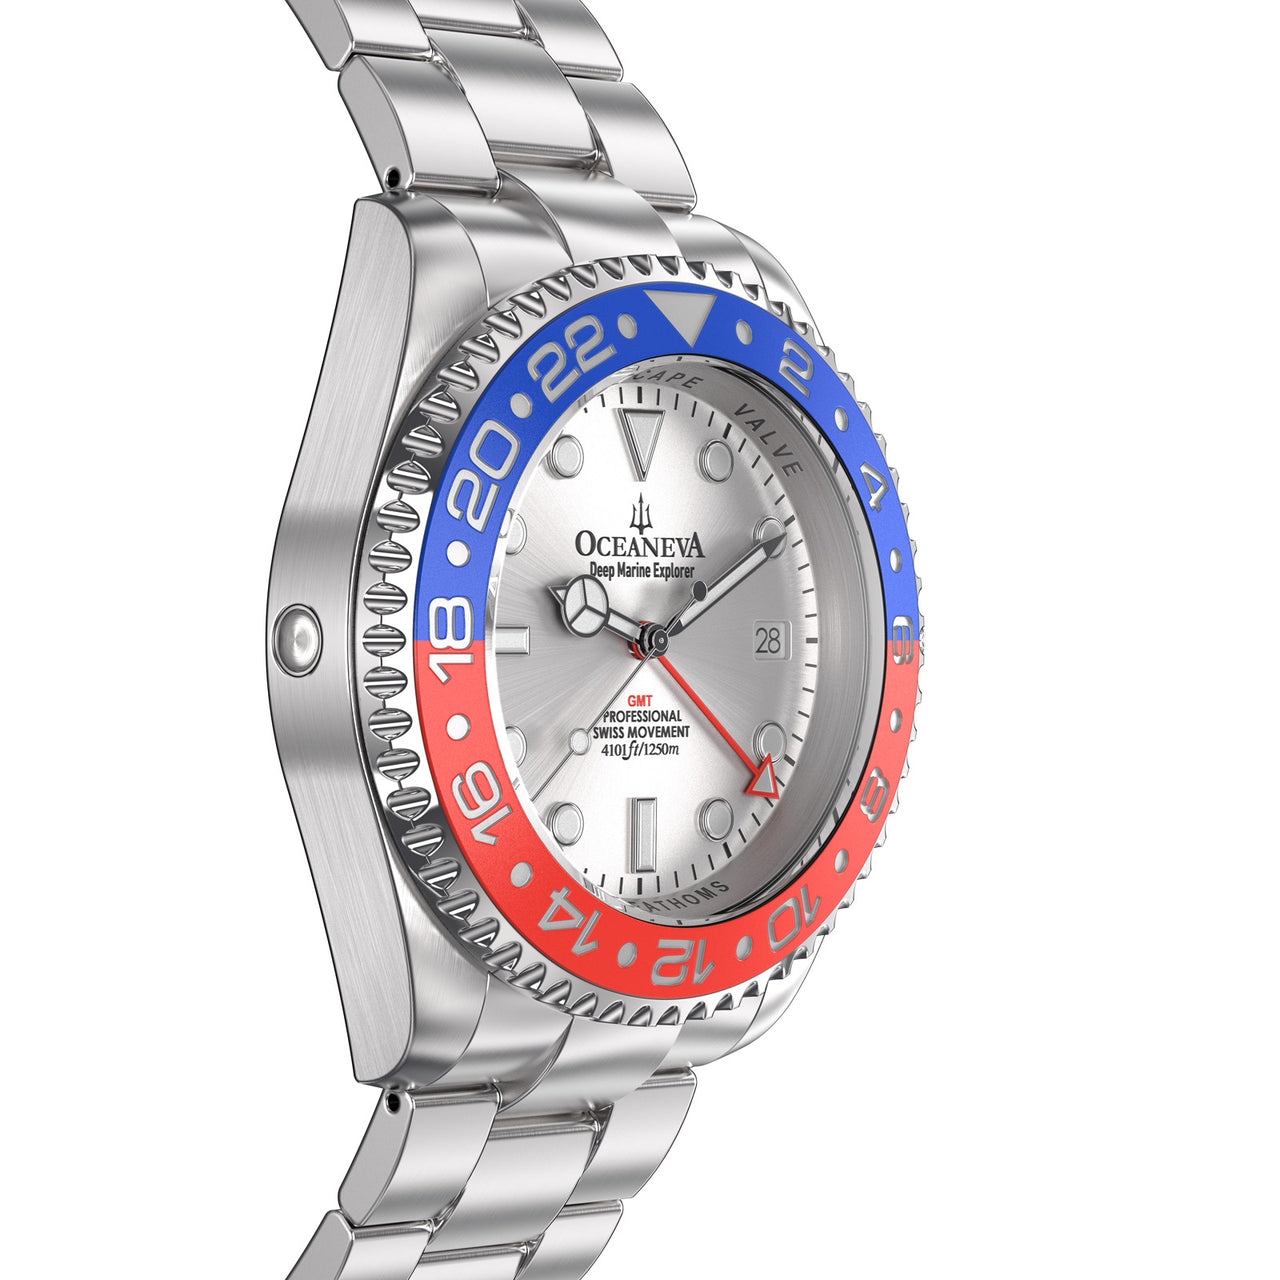 Oceaneva 1250M GMT Dive Watch Silver Blue And Red Side Helium Escape Valve View